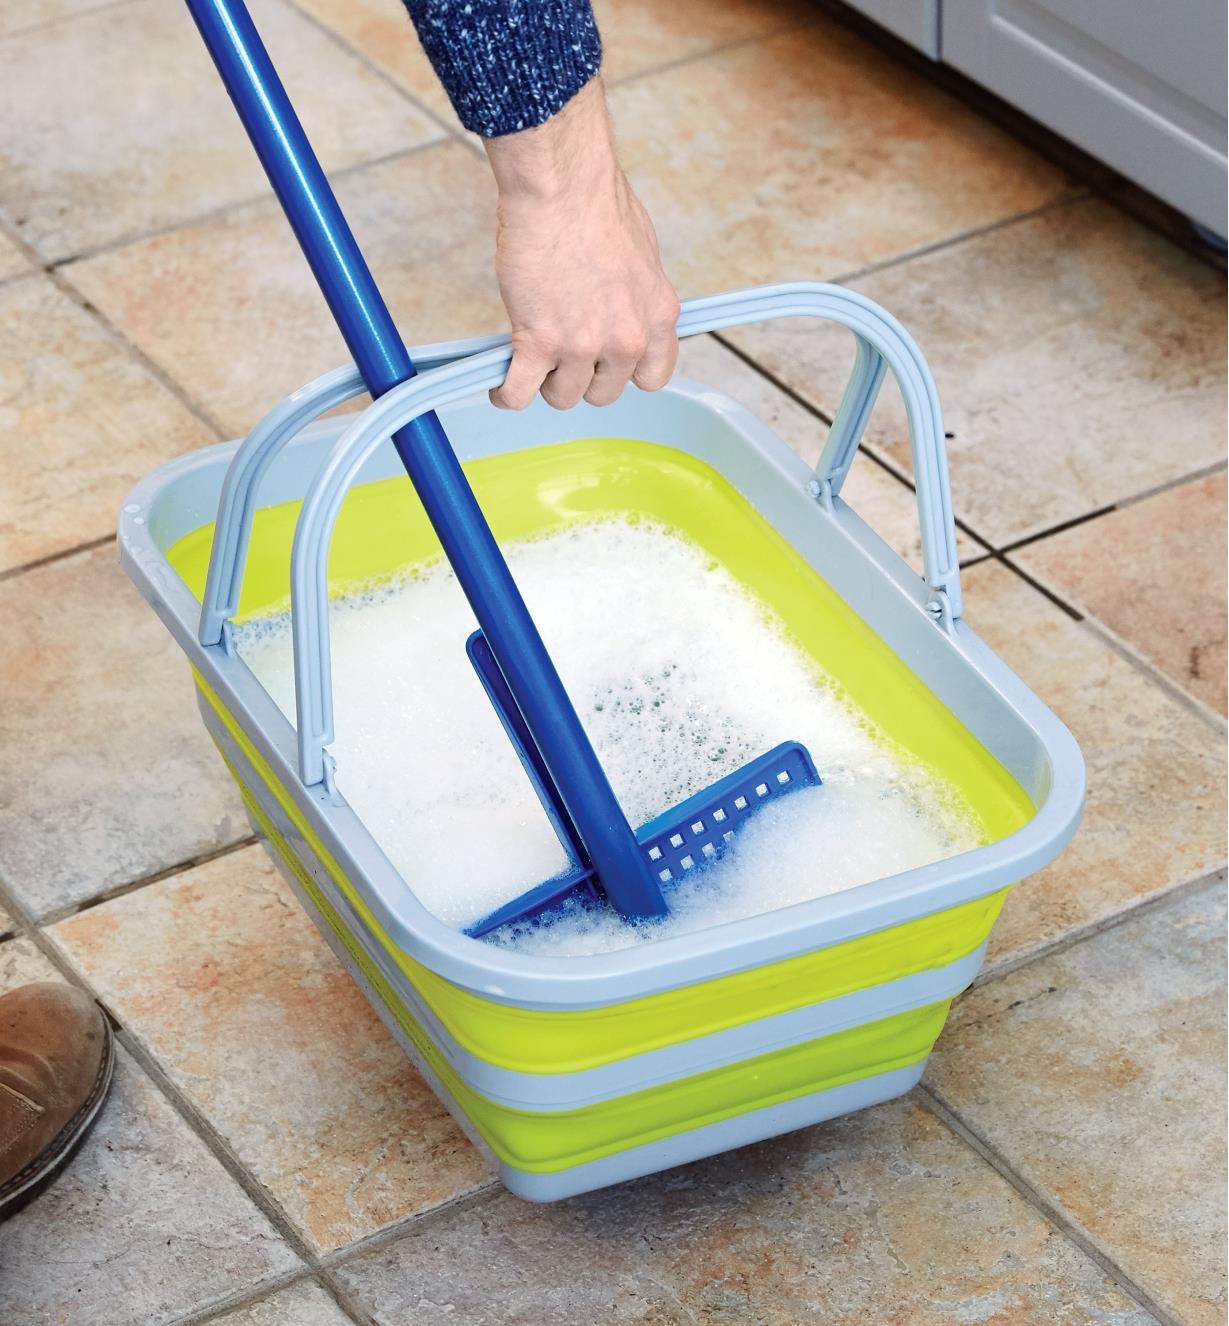 Rinsing a mop in a collapsible tote filled with soapy water.